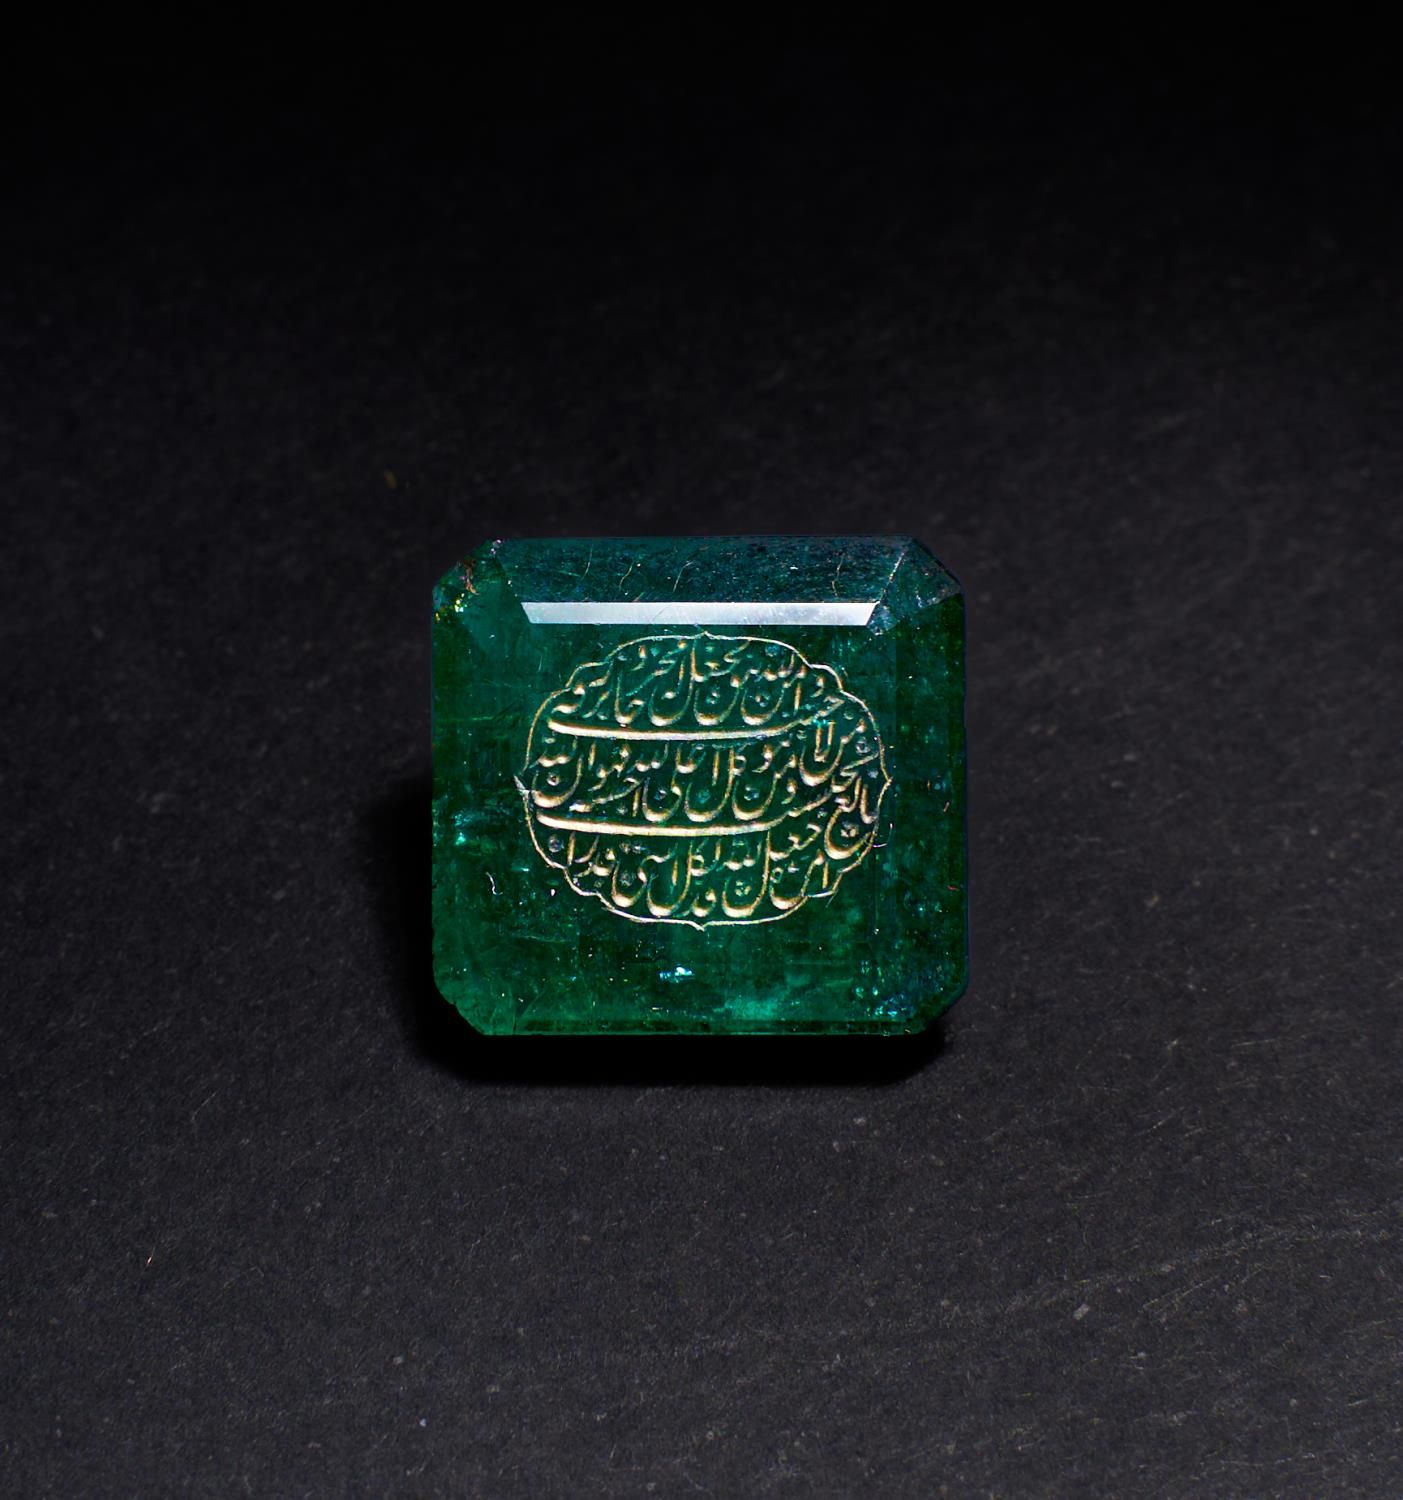 A HIGHLY RARE INSCRIBED EMERALD, LATE 18TH CENTURY, INDO PERSIAN UNE TRÈS RARE É&hellip;